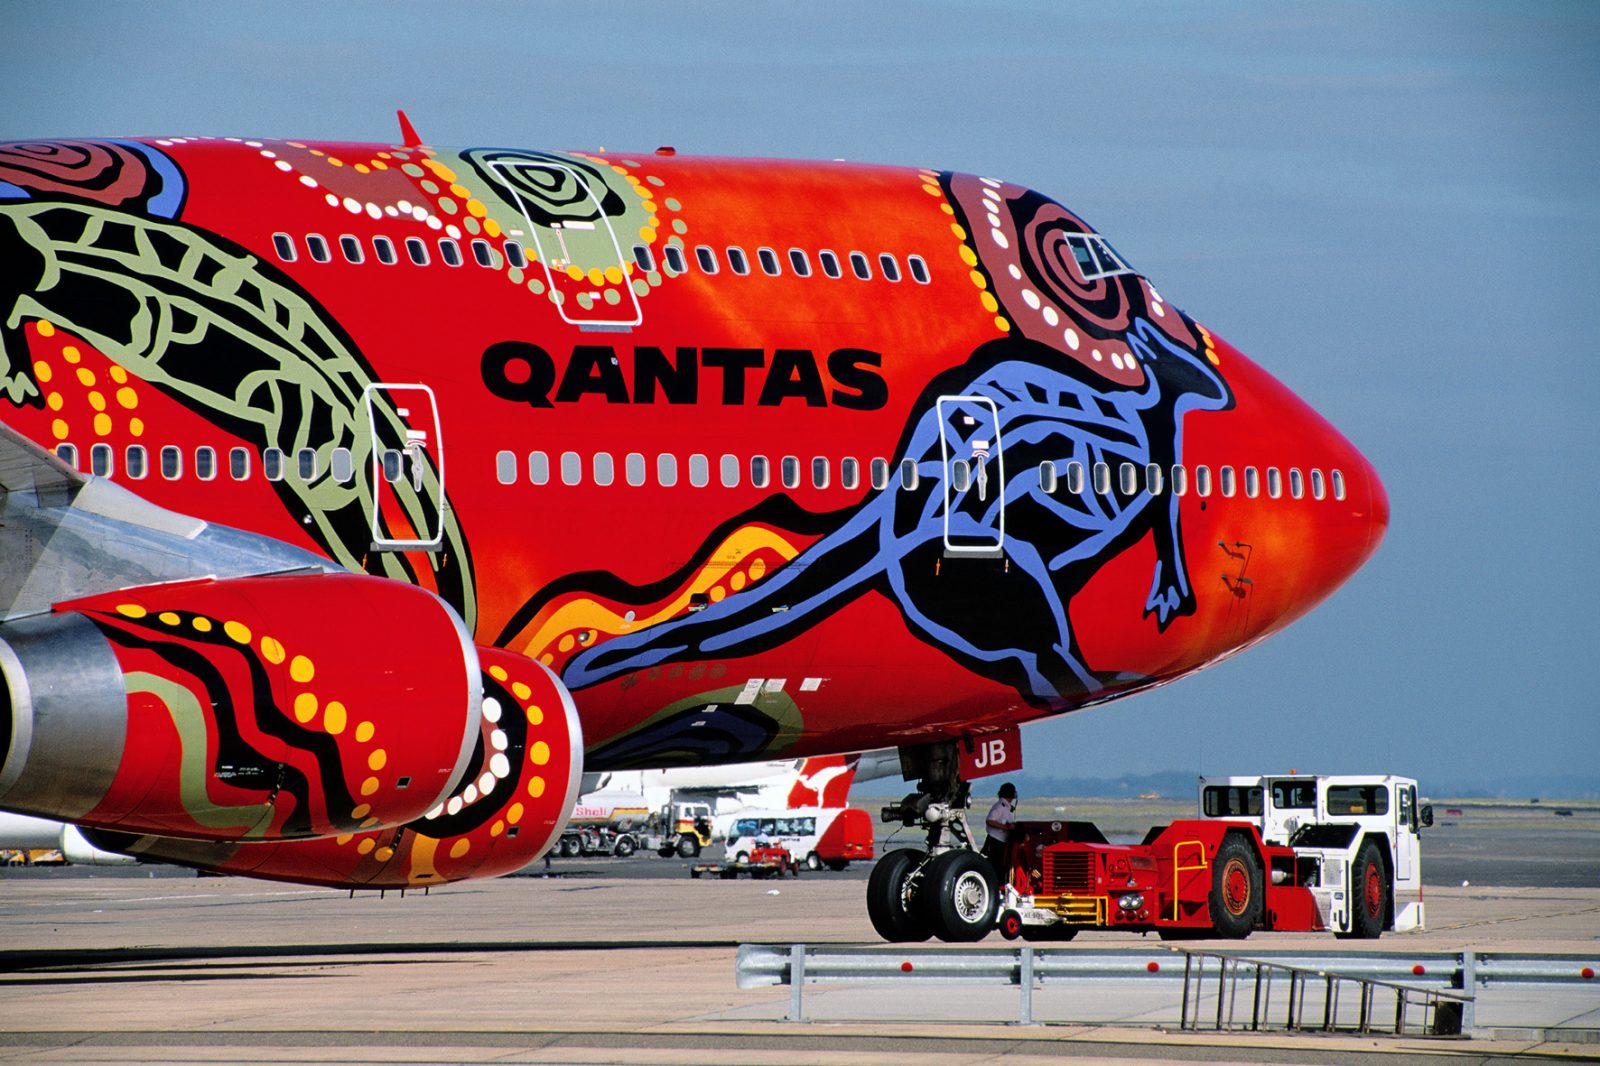 a red airplane with a colorful design on it